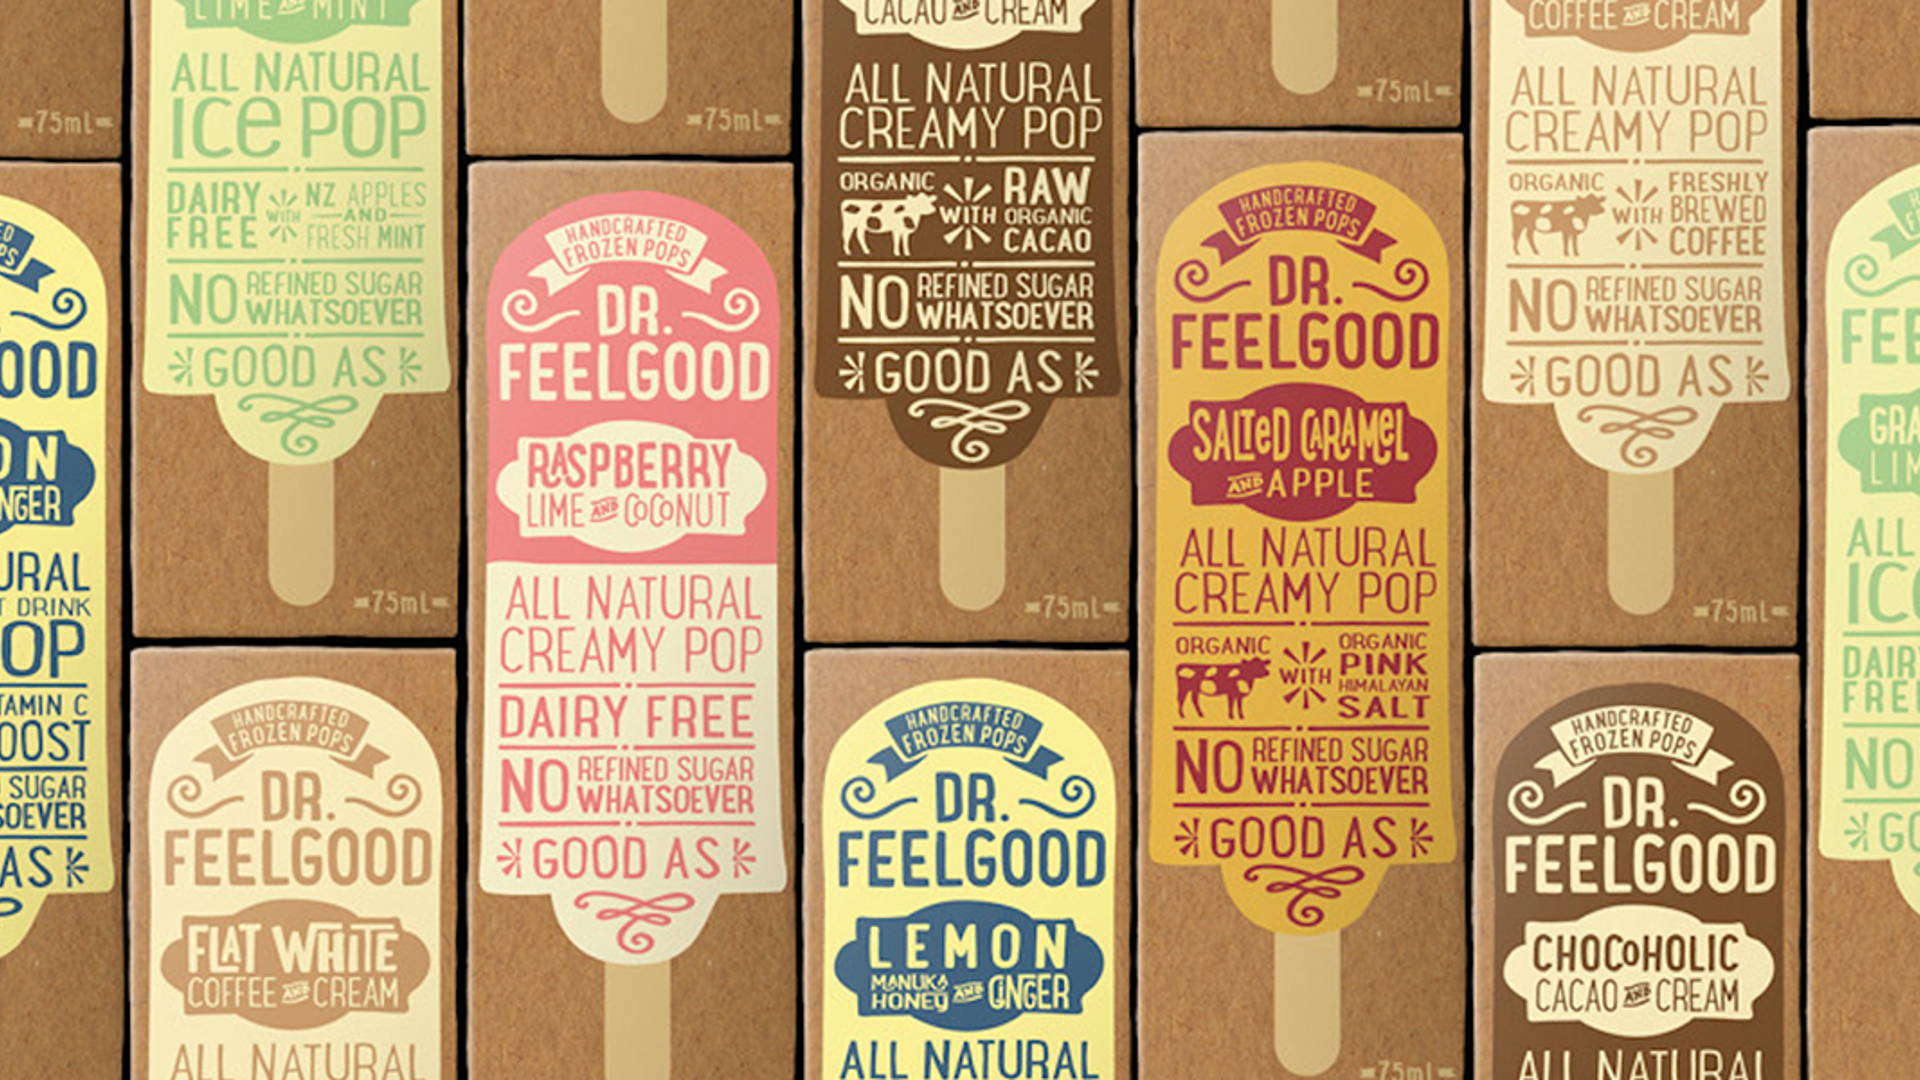 Featured image for Dr.Feelgood Frozen Pops